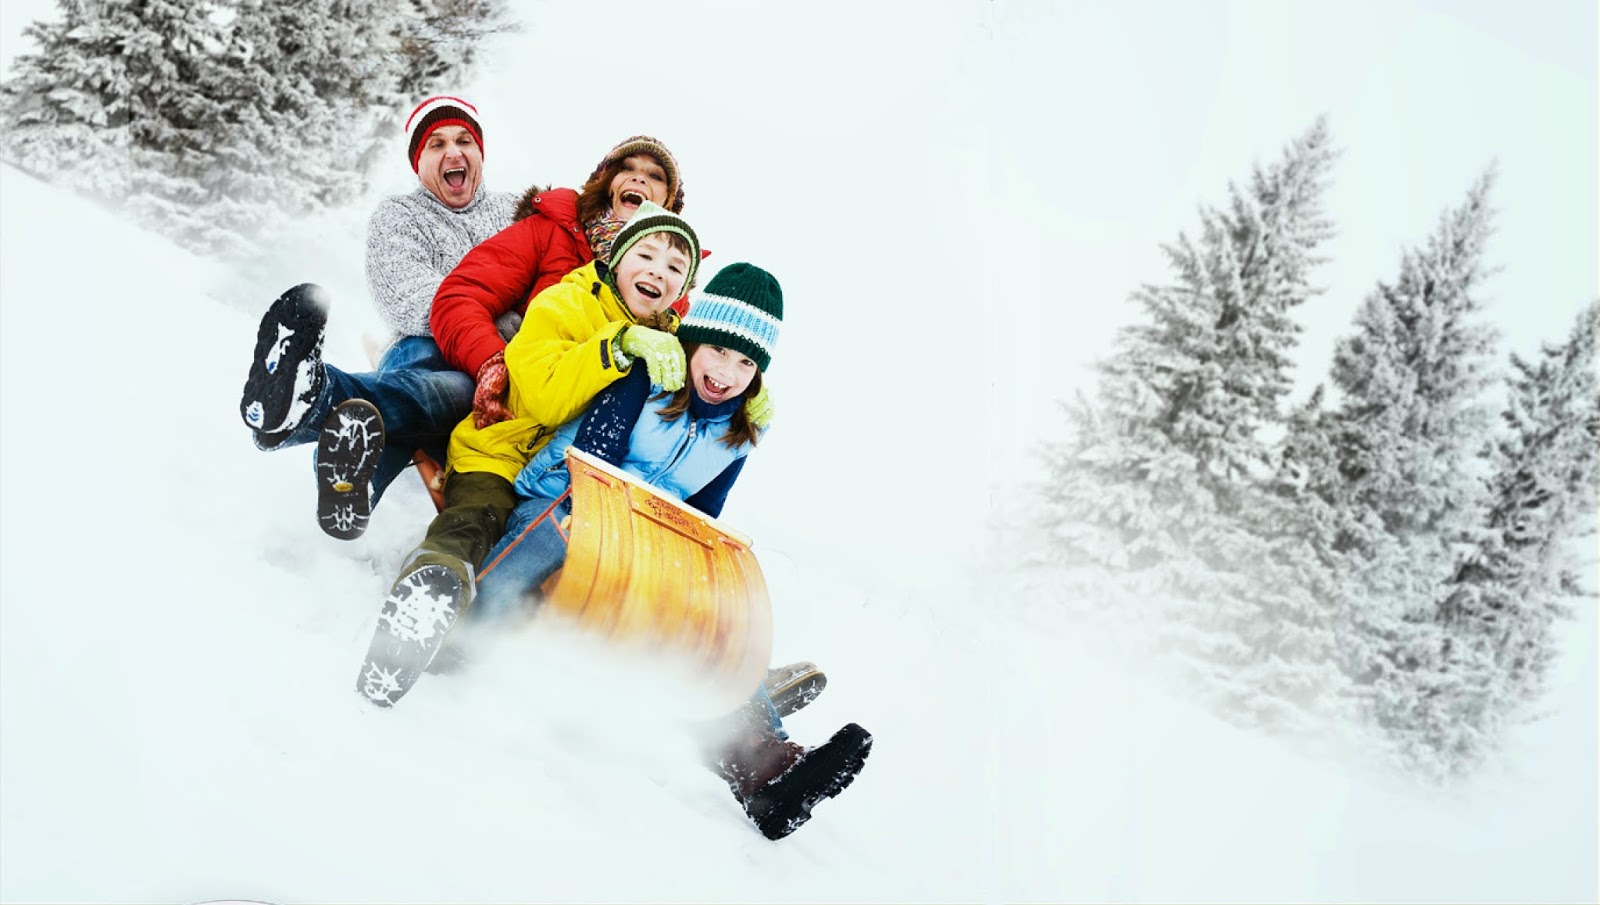 5 ideas for outdoor family outings on the cheap